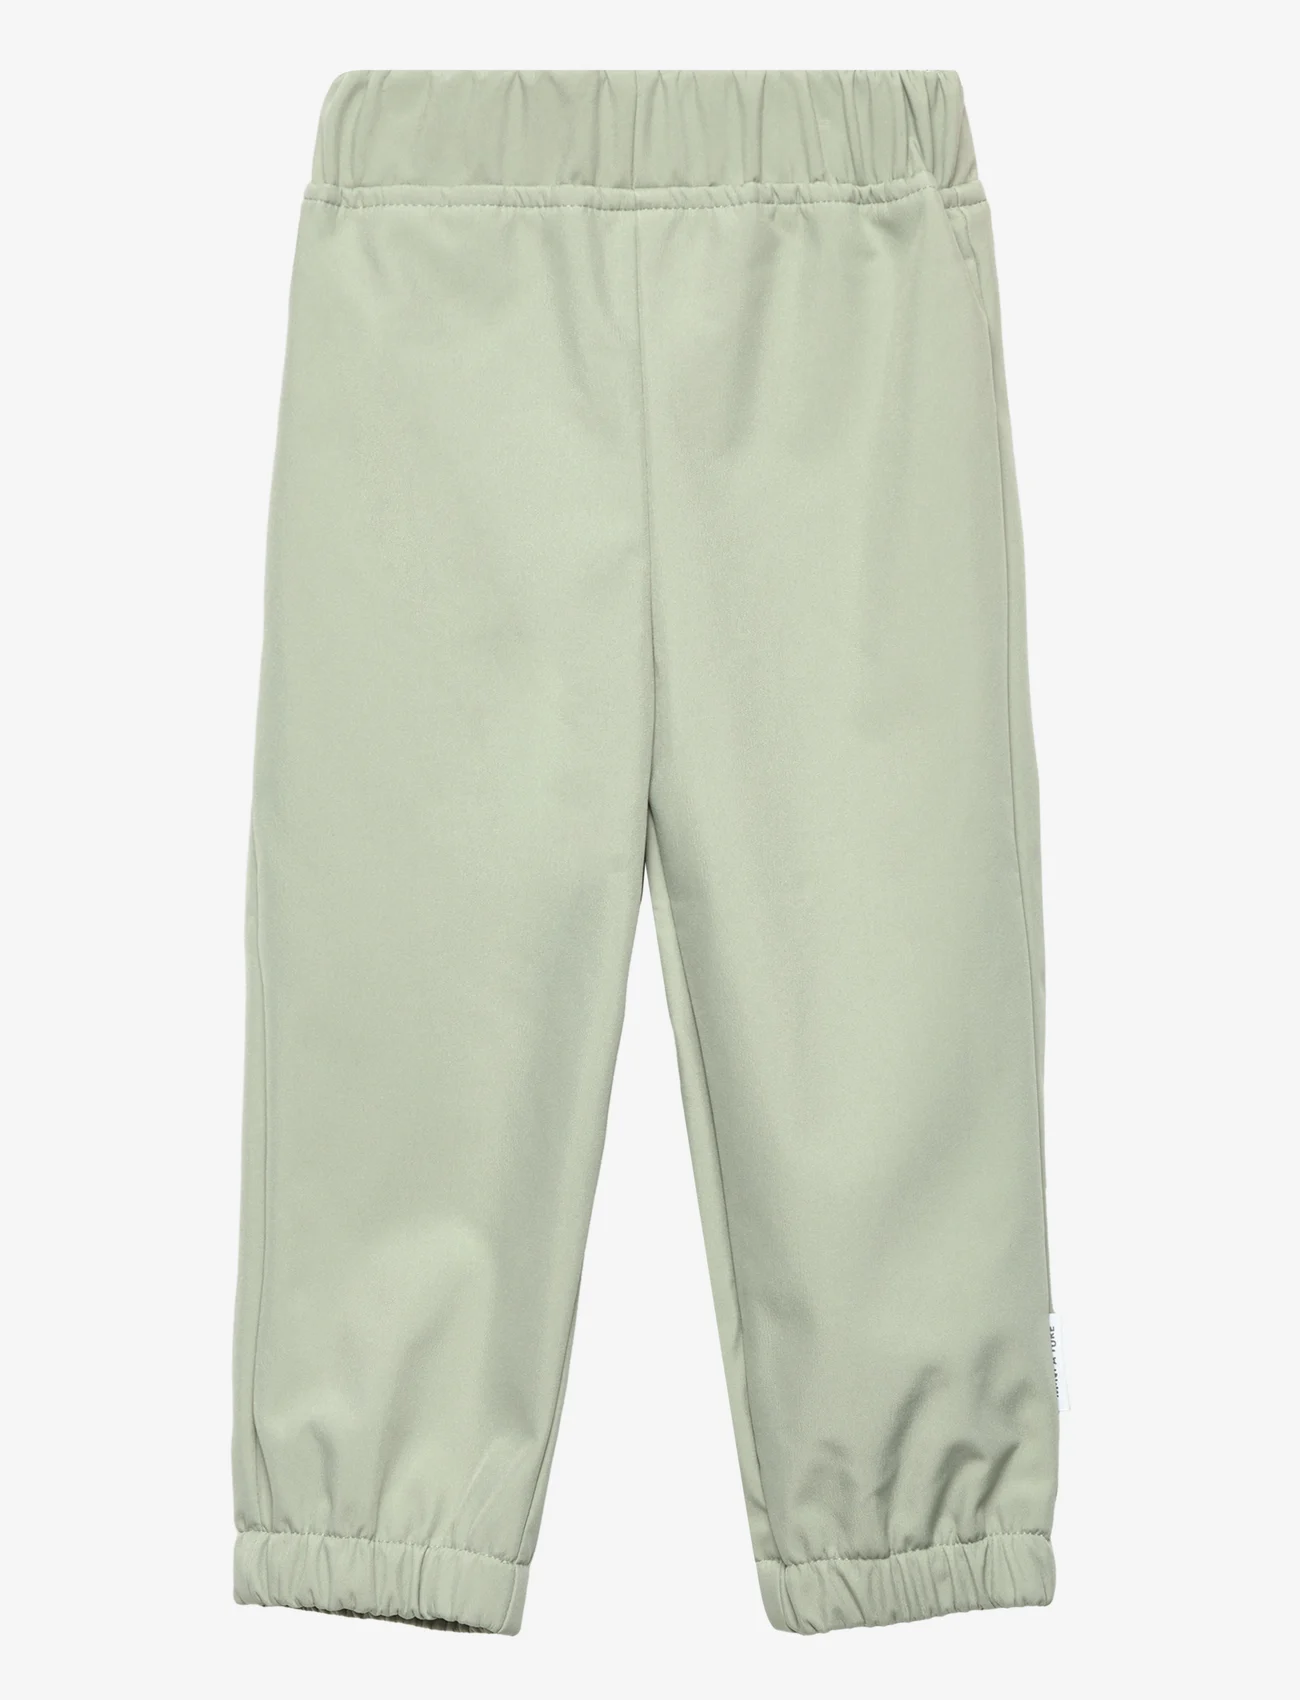 Mini A Ture - Aian spring softshell pants - seagrass - 1